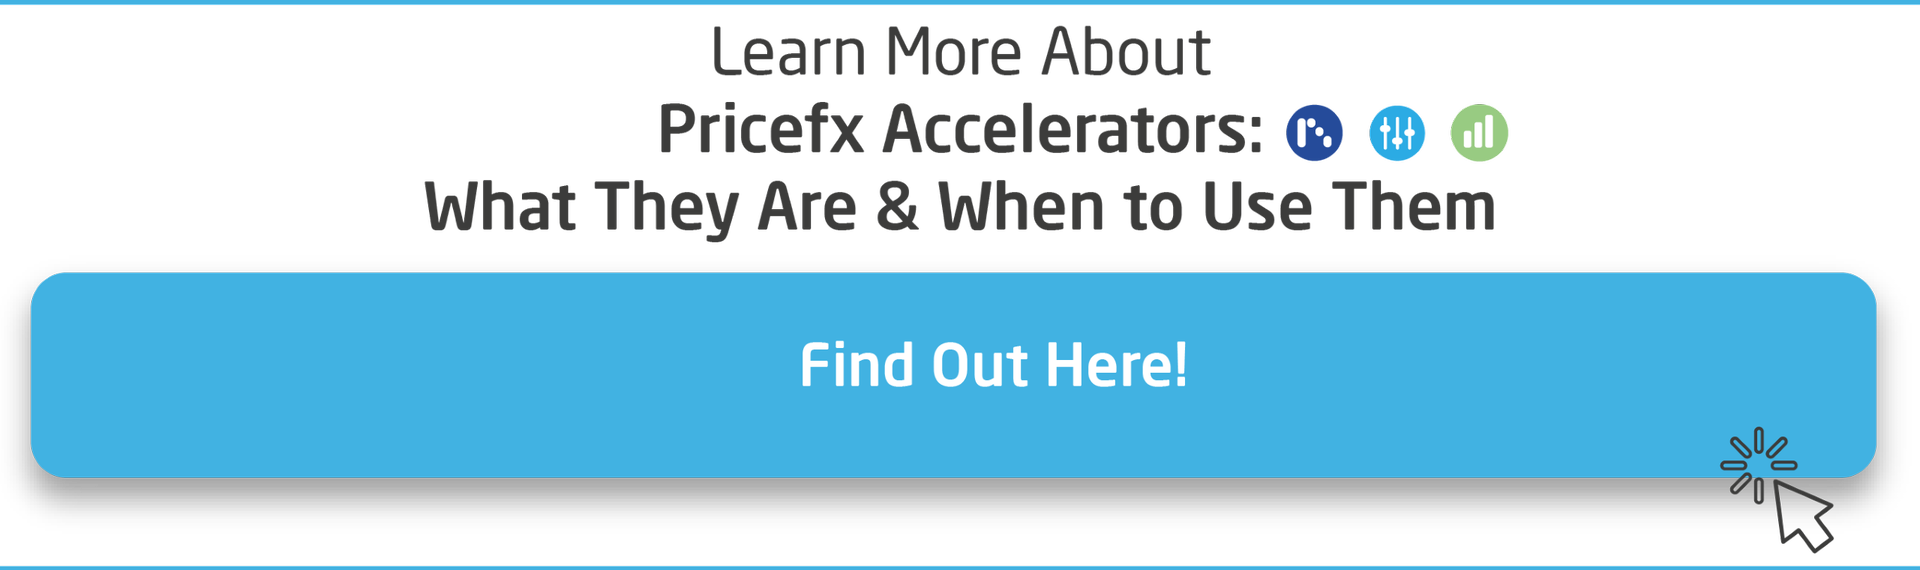 CTA-Pricefx-Accelerators-What-They-Are-and-When-to-Use-Them